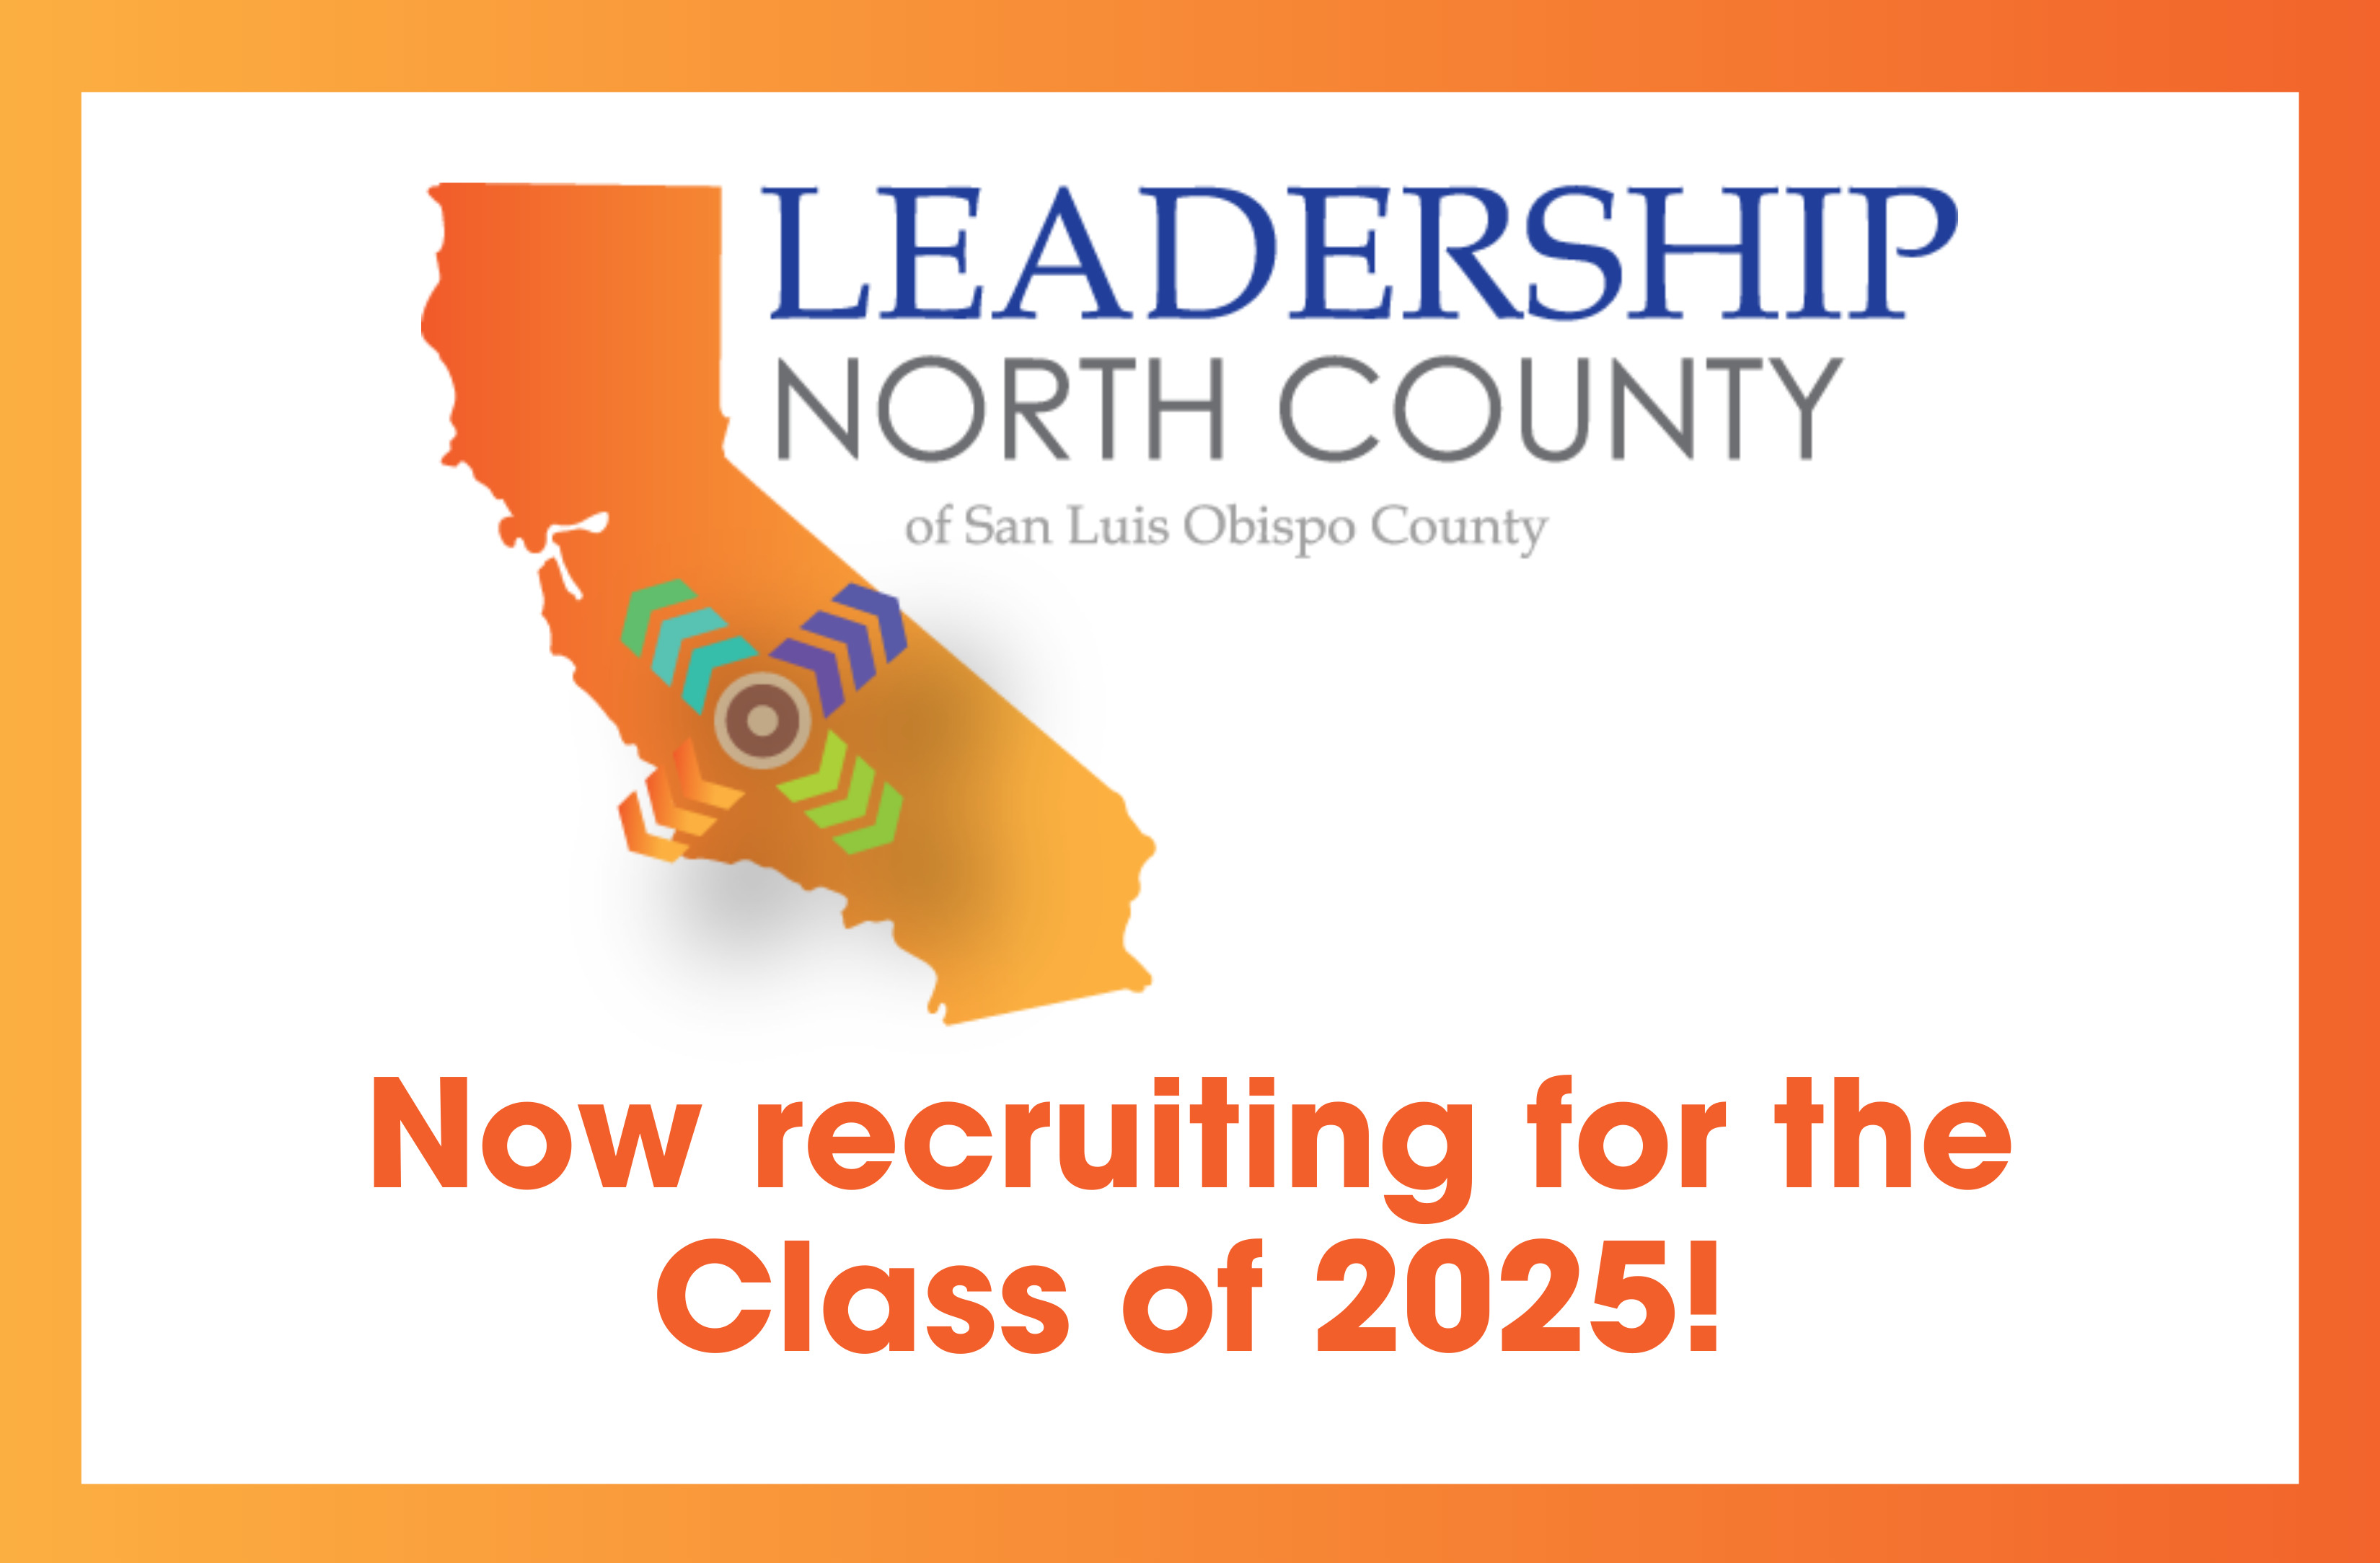 Leadership North County logo with text "Now recruiting for the Class of 2025!"